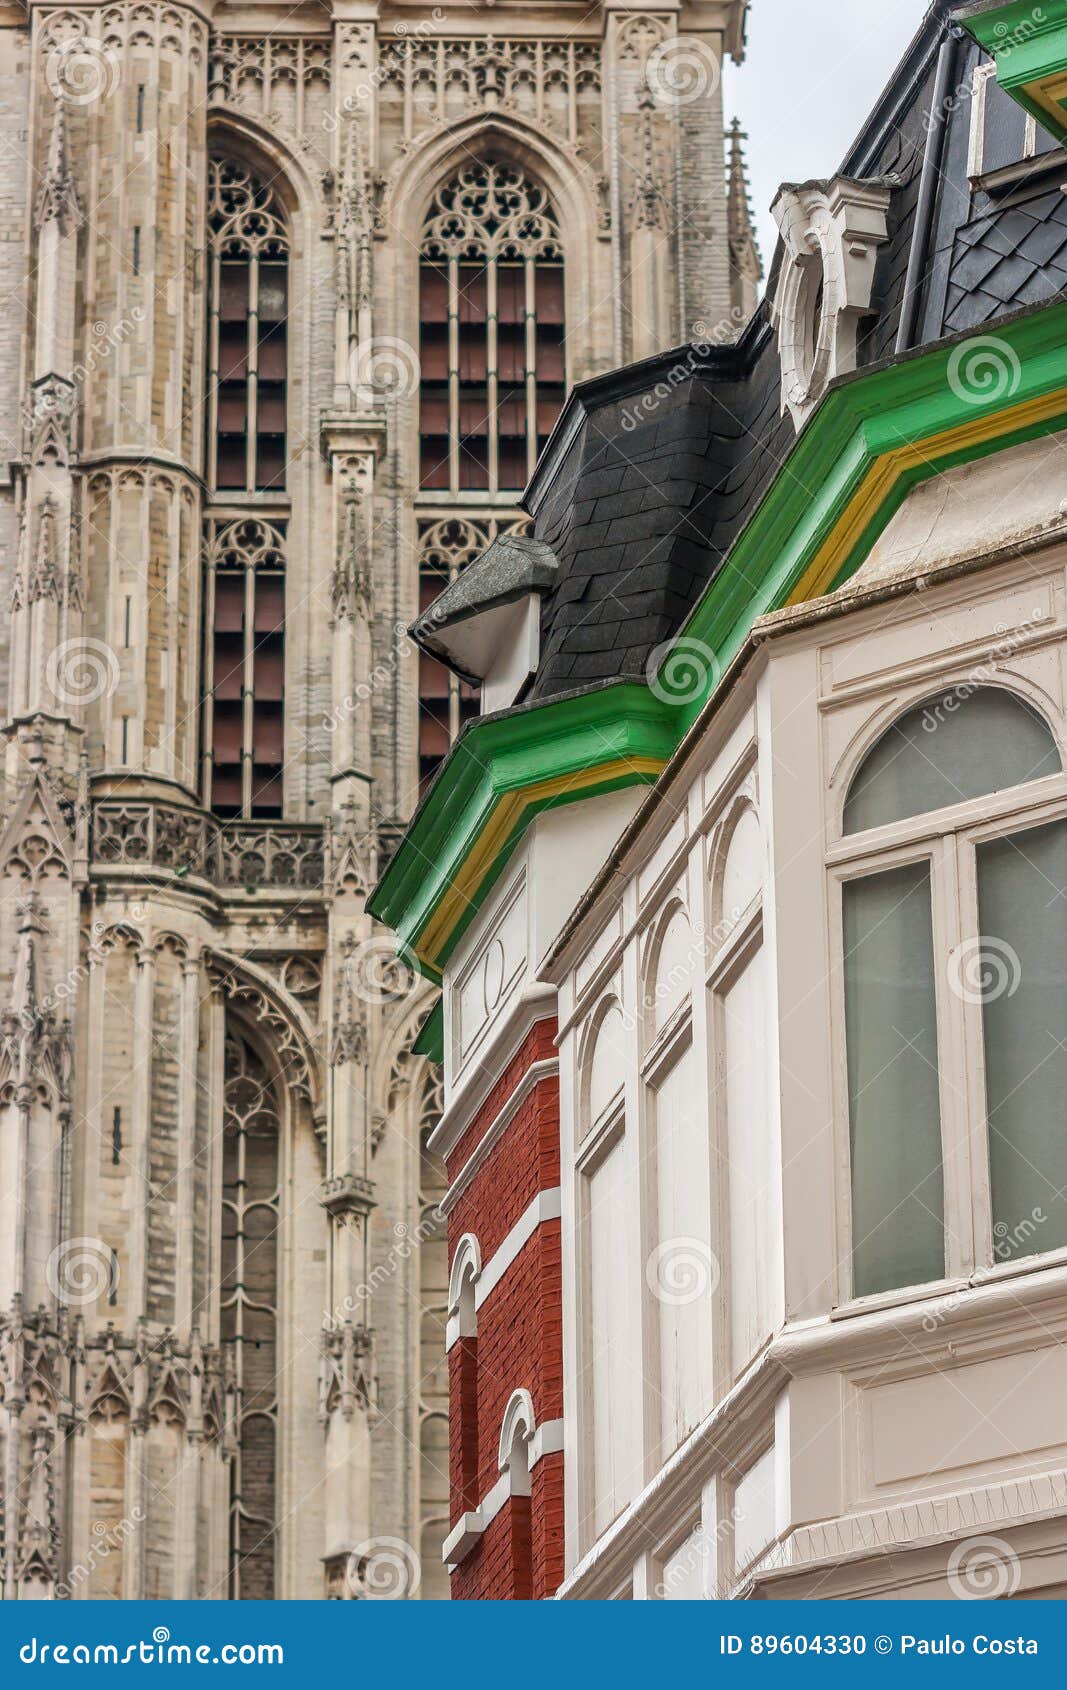 Antwerp Building And Architecture Stock Photo - Image of ...